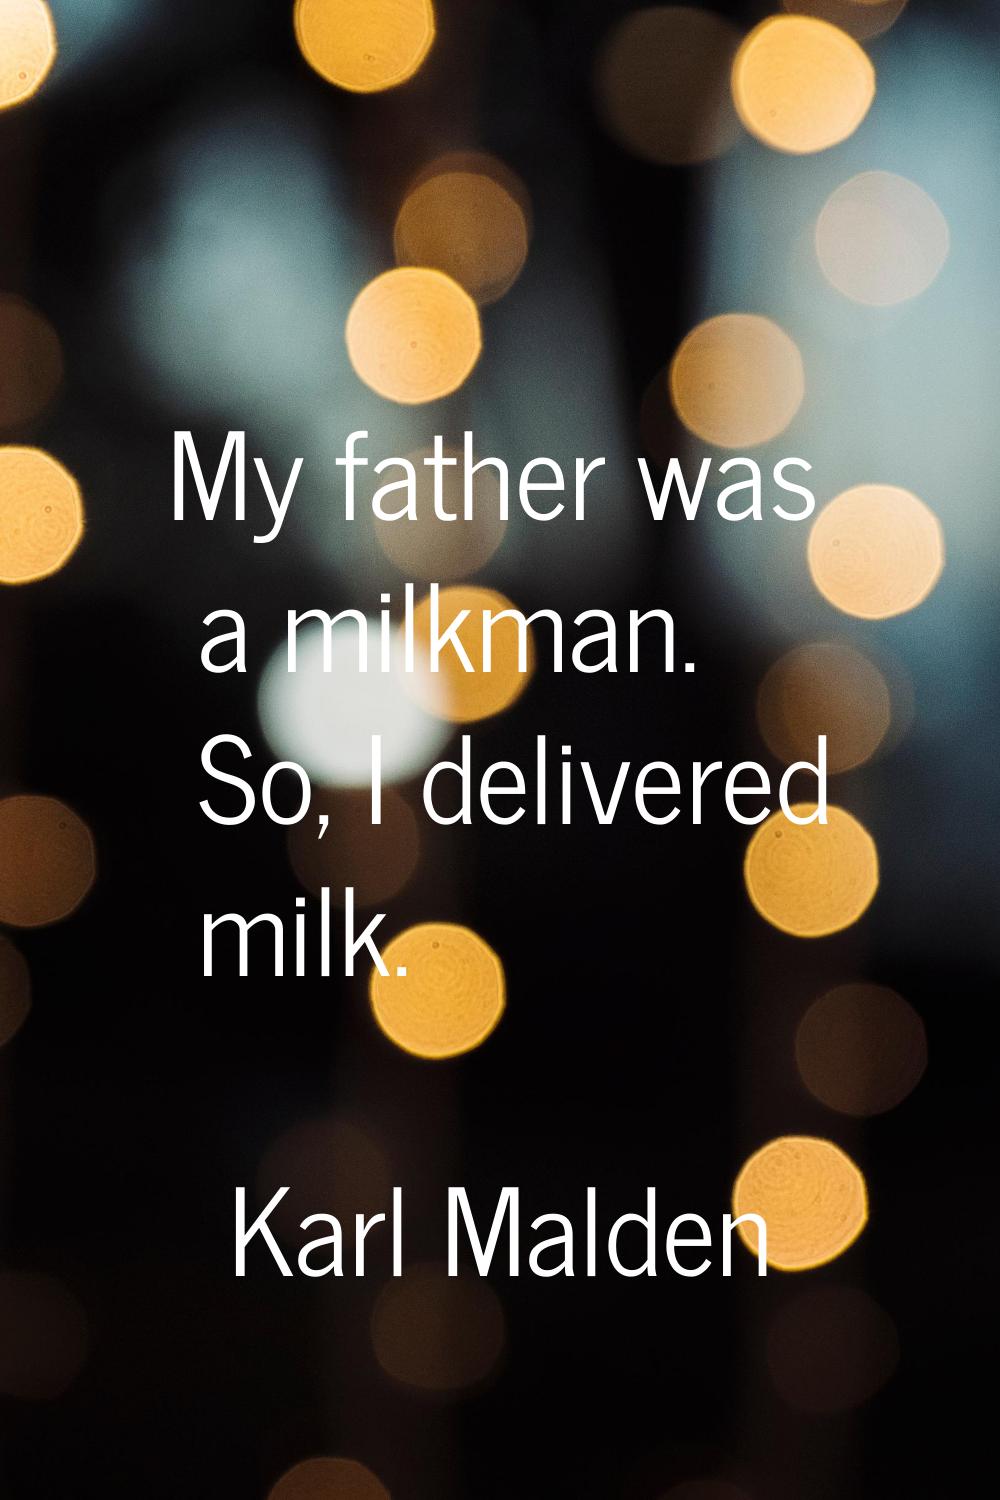 My father was a milkman. So, I delivered milk.